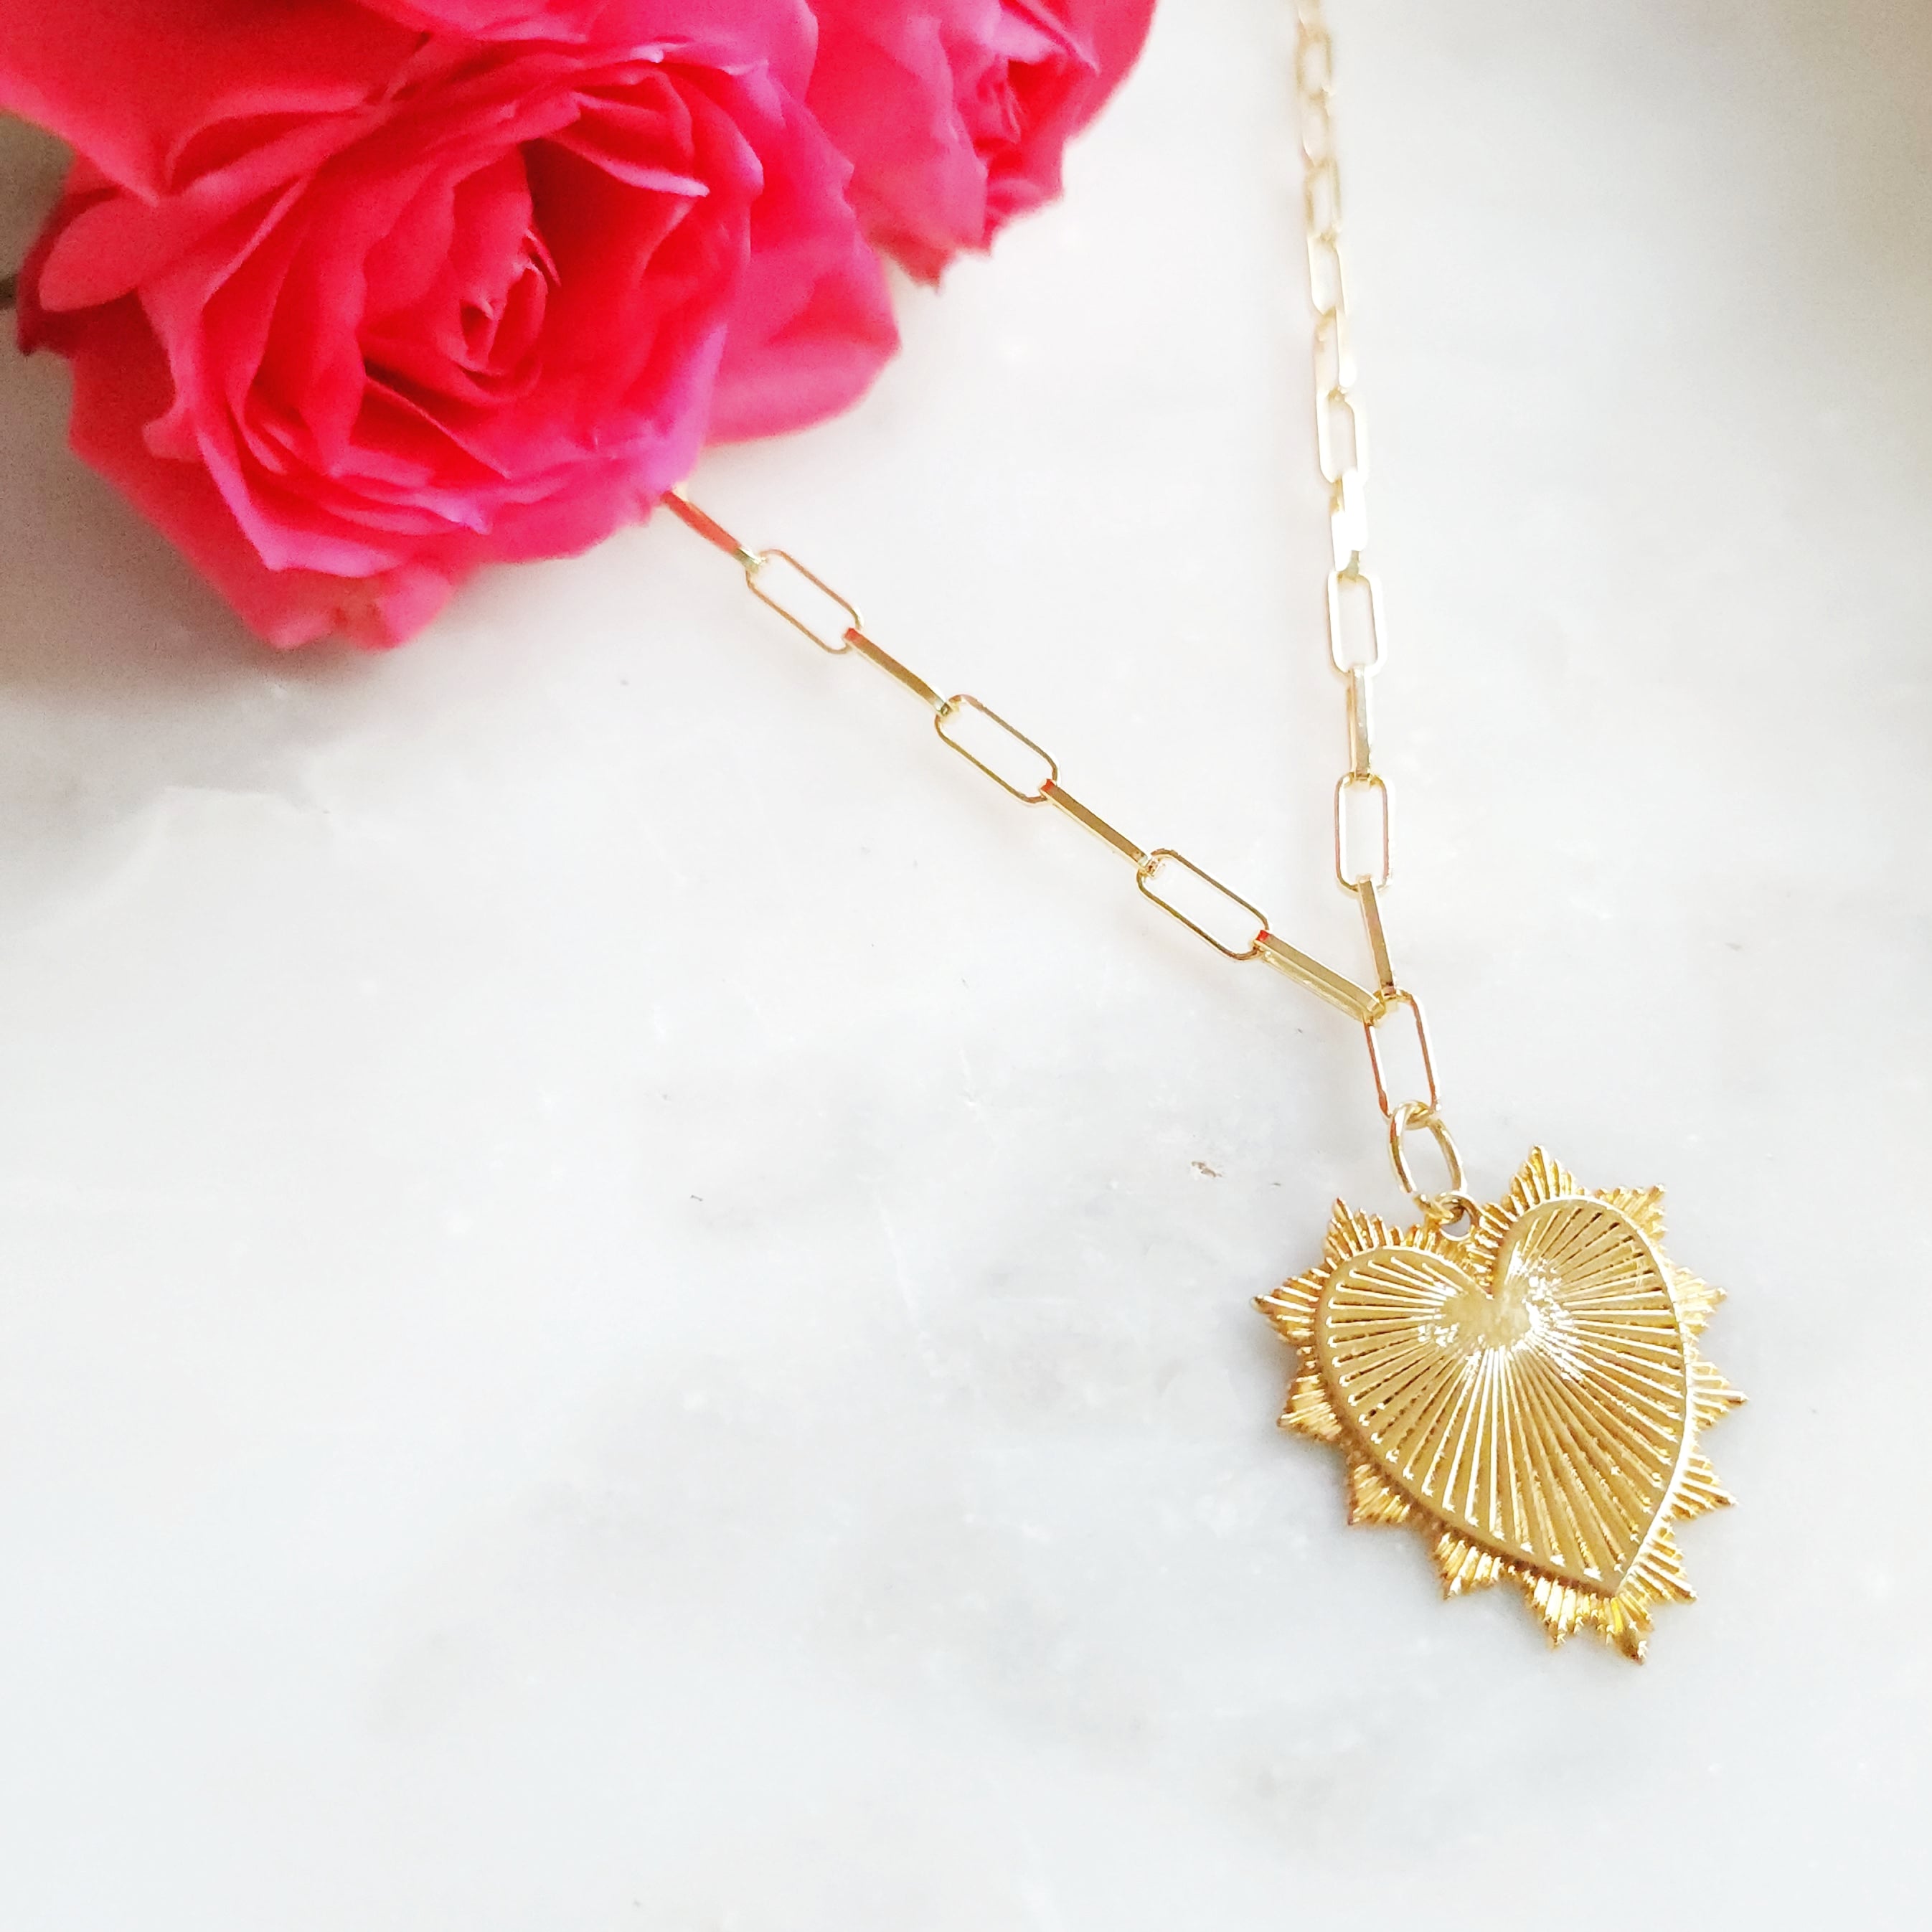 Charmed Life Single Heart Necklace